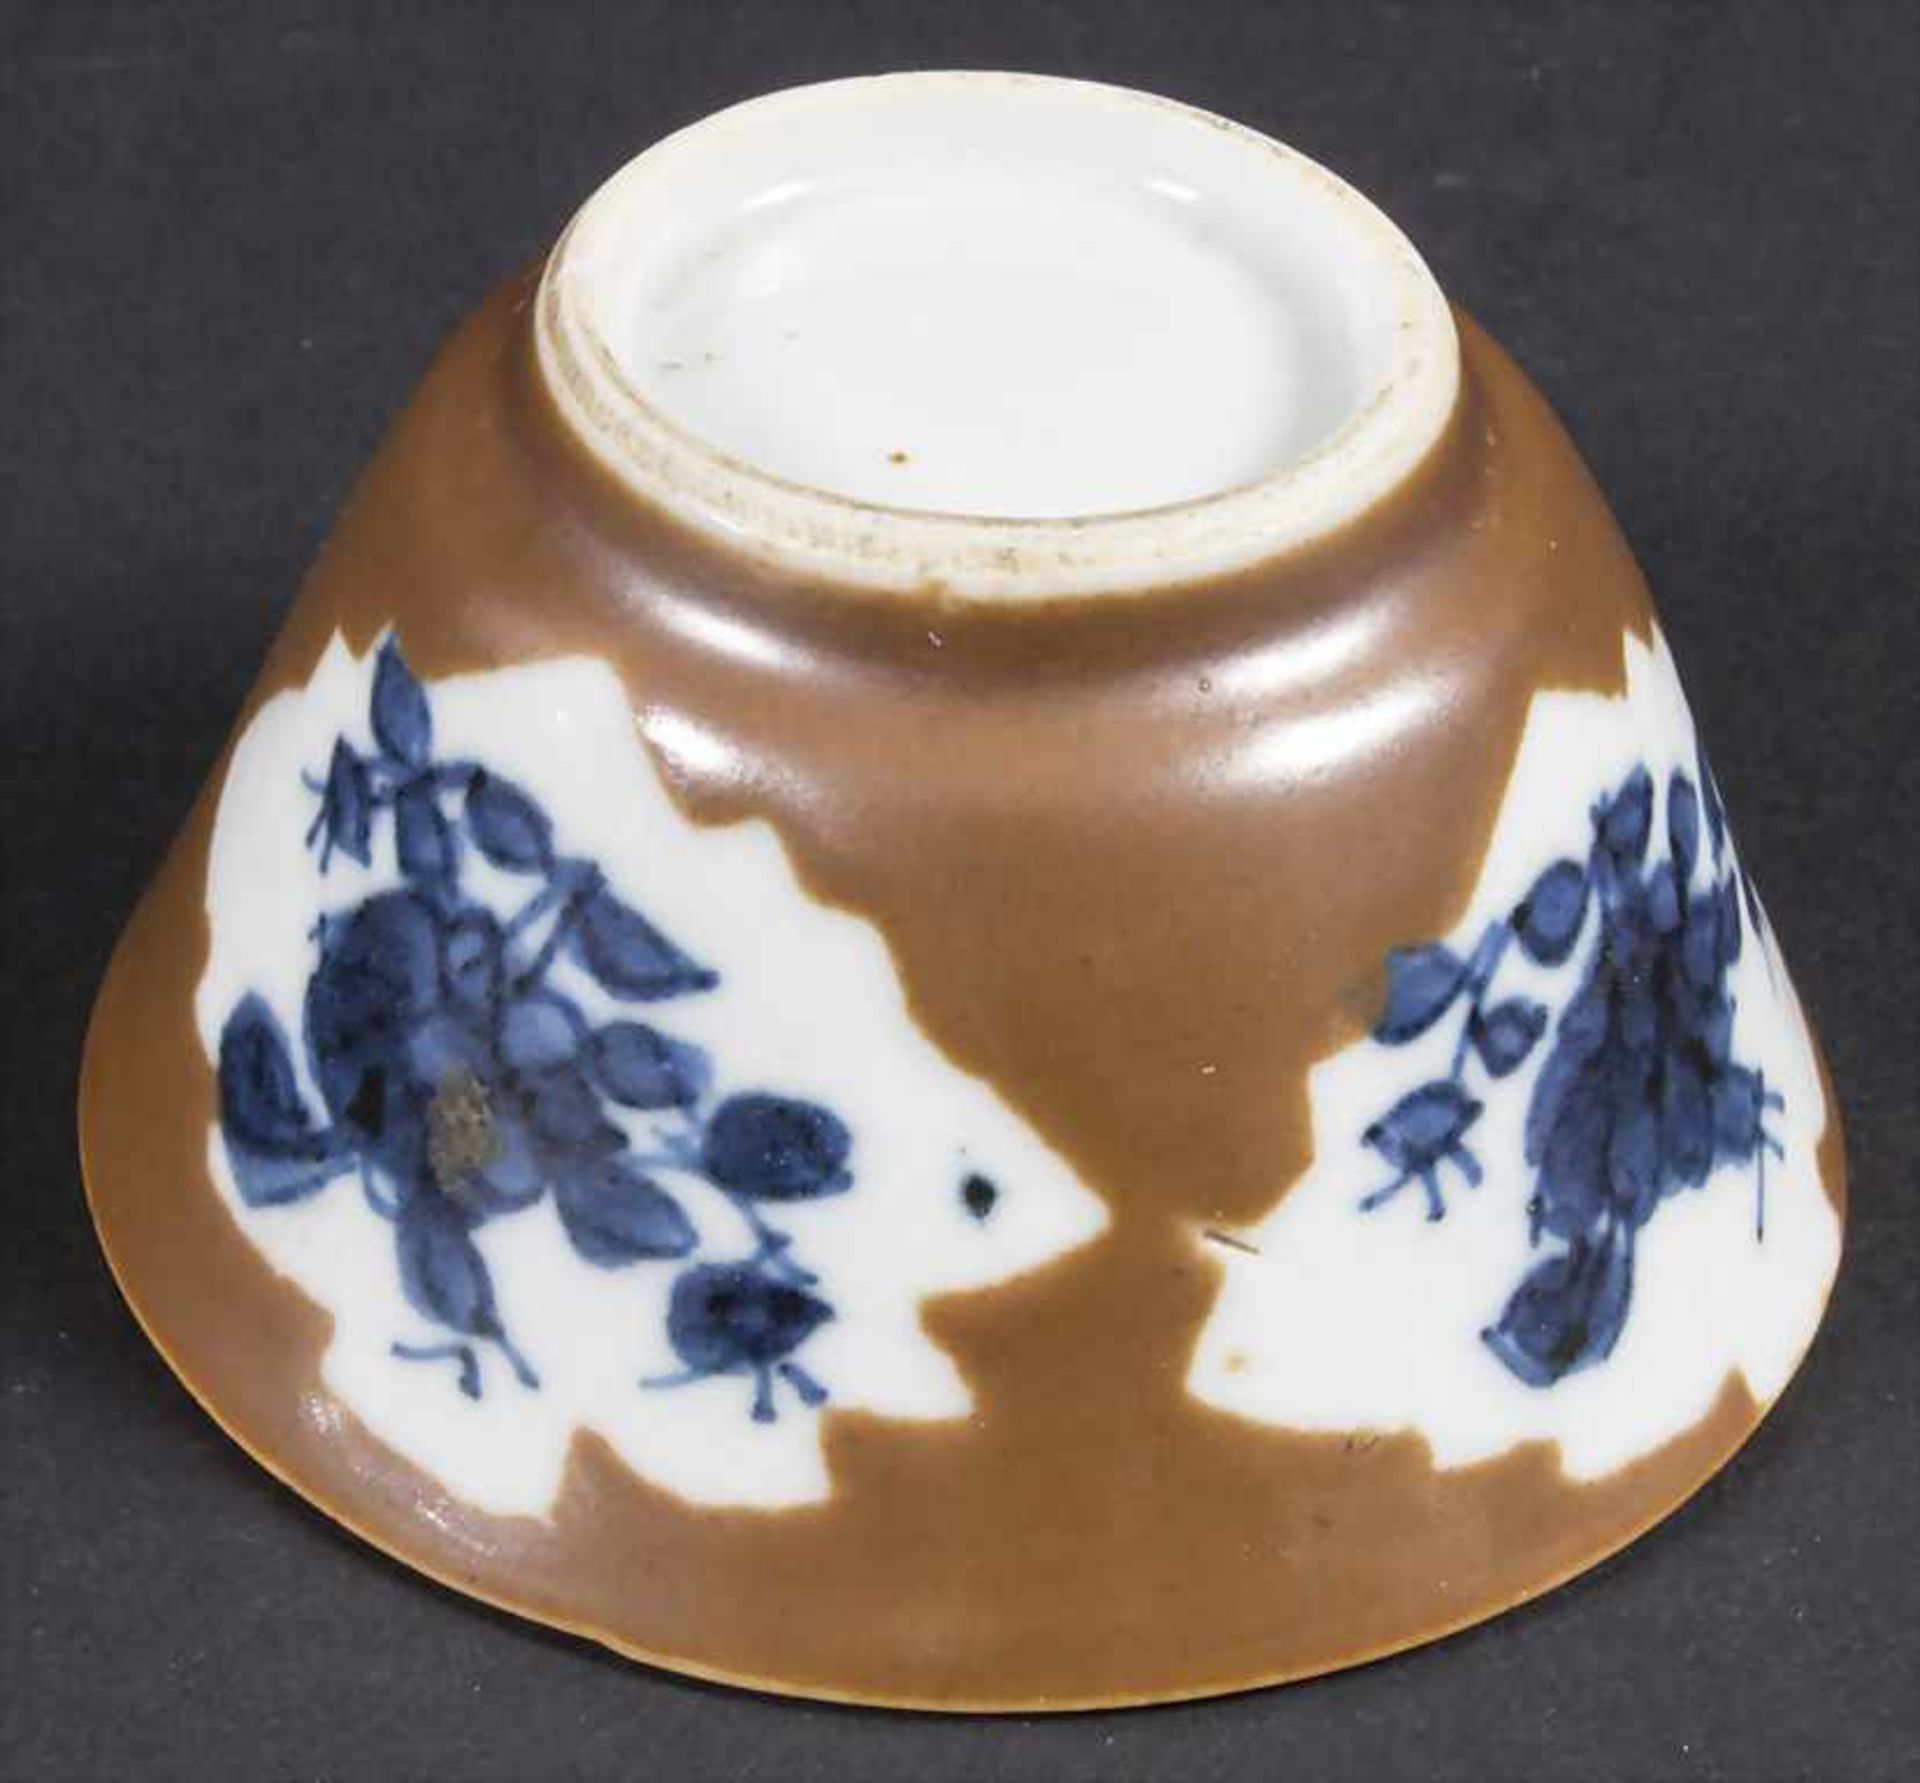 Kumme mit Unterteller / A bowl with plate, China, Qing-Dynastie (1644-1911), wohl 18.Jh. (Kangxi- - Image 6 of 7